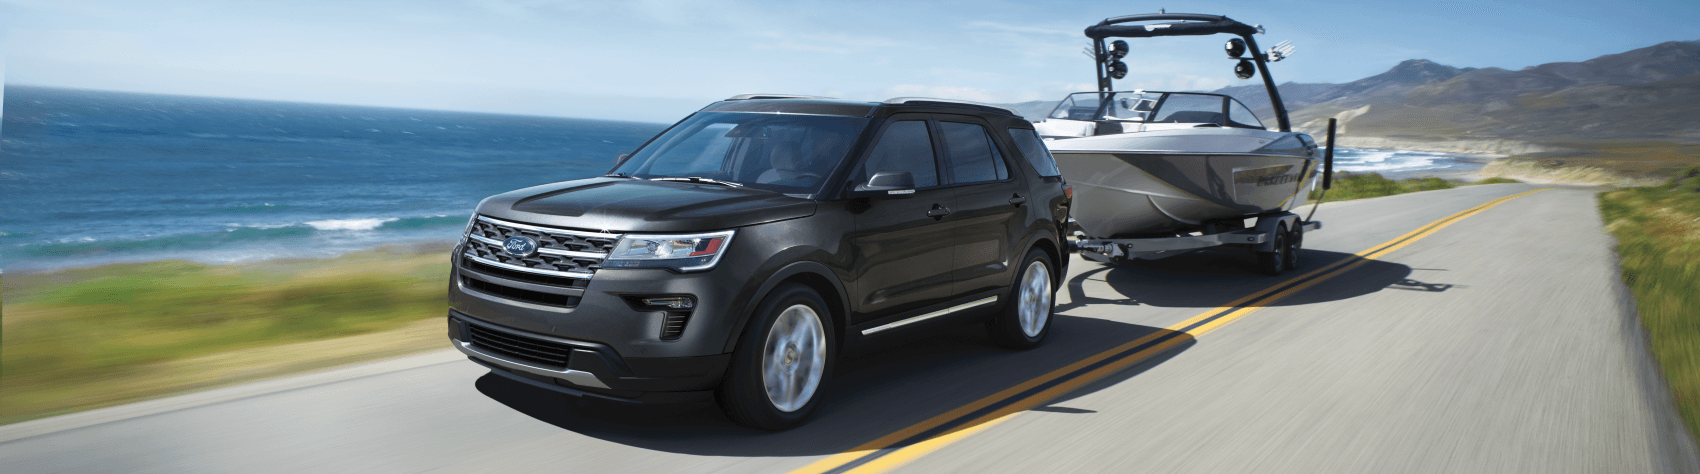 Used 2019 Ford Explorer XLT Towing Boat Maguire Ford